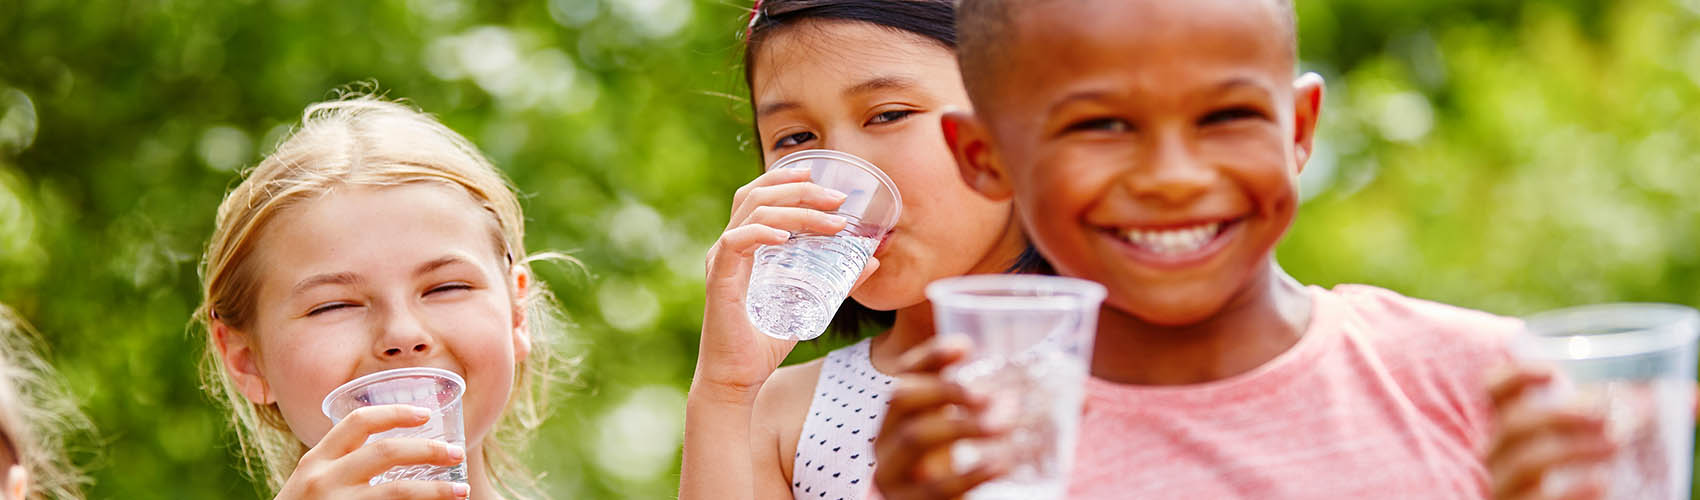 How to Get Your Child to Drink More Water Over the Summer Season